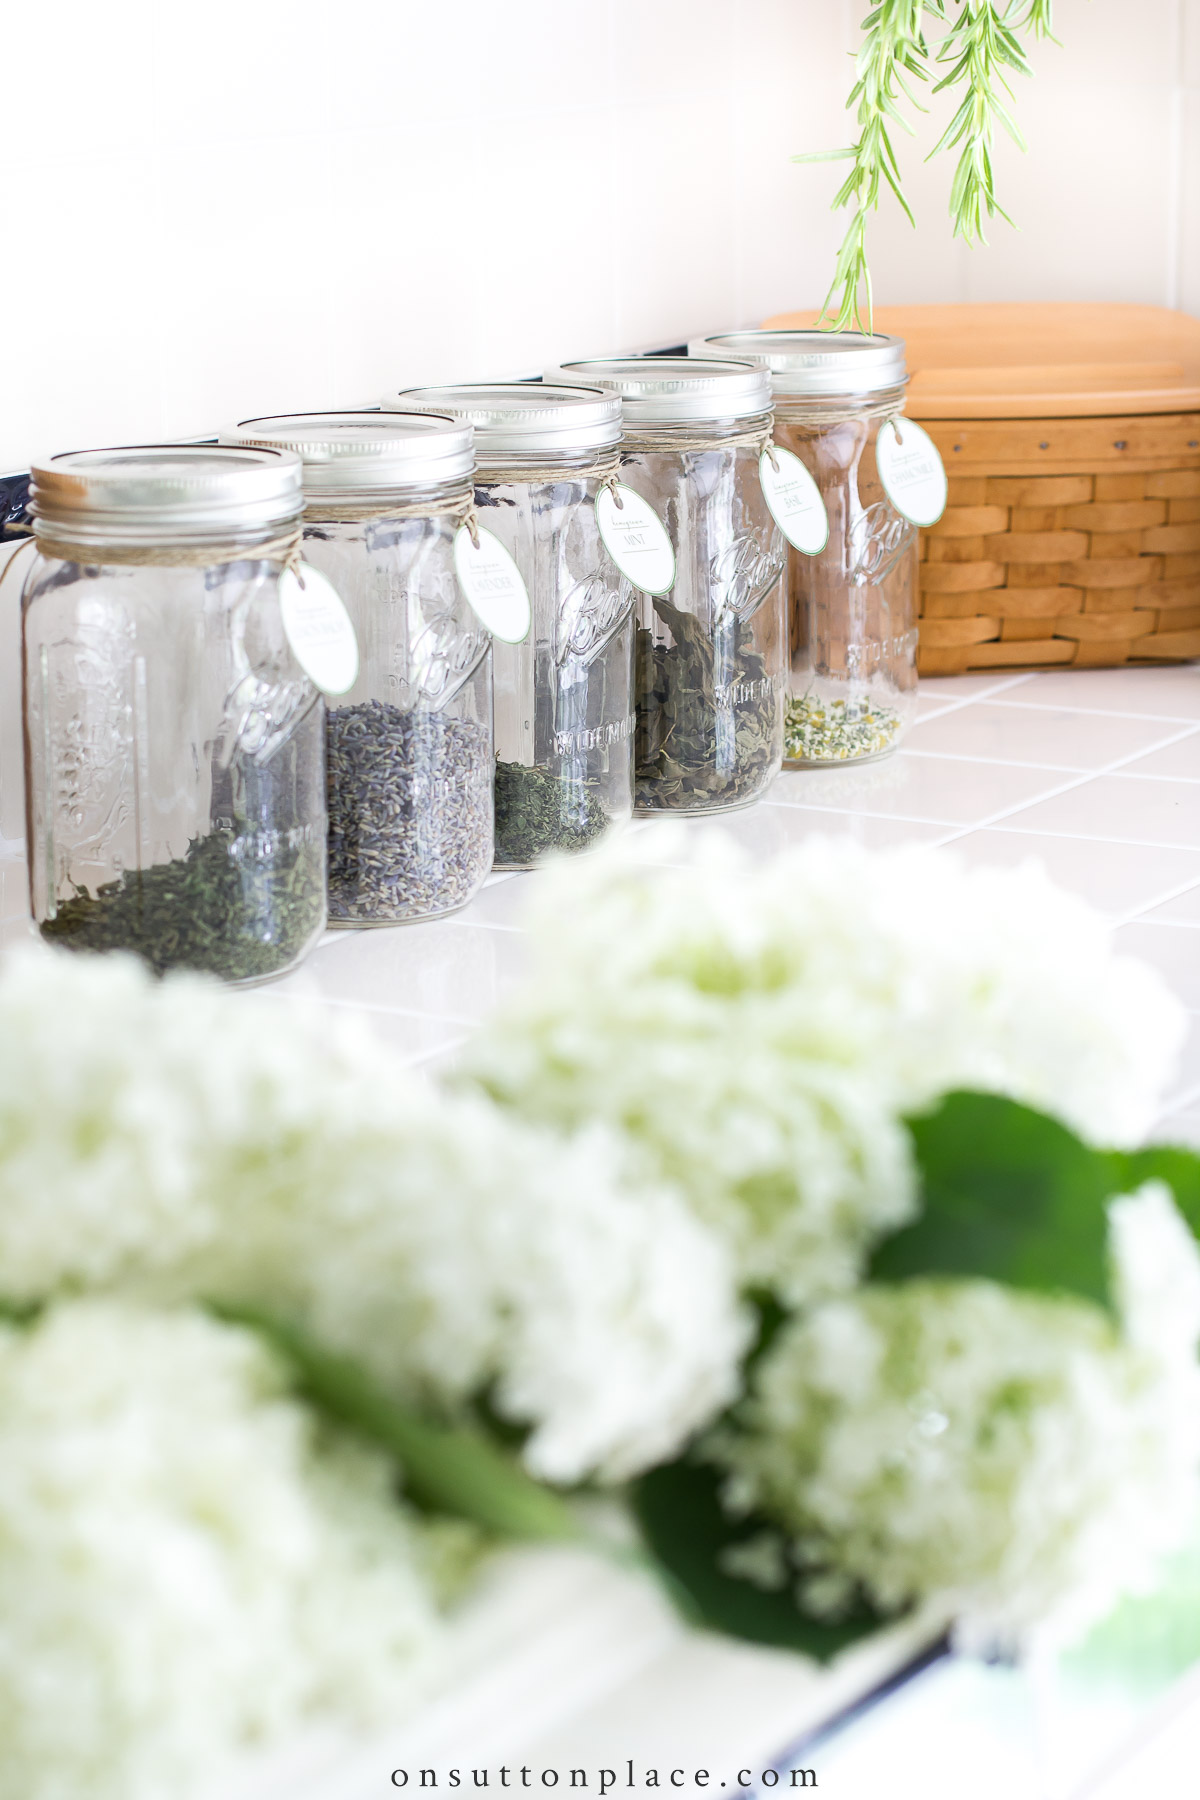 Trendy Wedding Centerpieces: 20 Chic Ideas For Every Taste  Wedding  centerpieces mason jars, Mason jar wedding, Wedding centerpieces diy